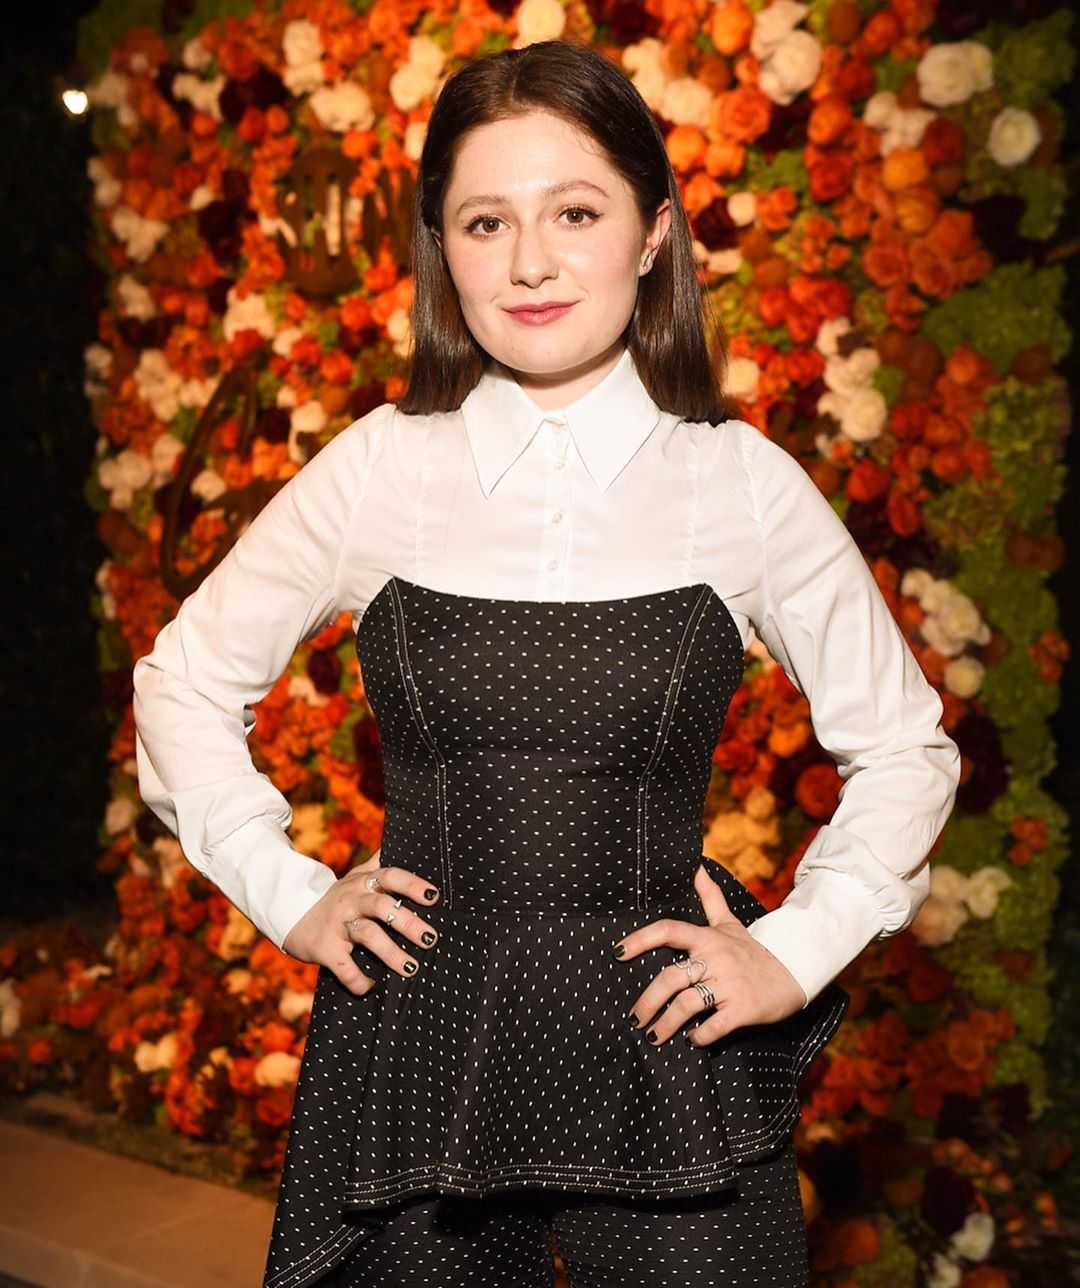 70+ Hot Pictures Of Emma Kenney From Shameless 20